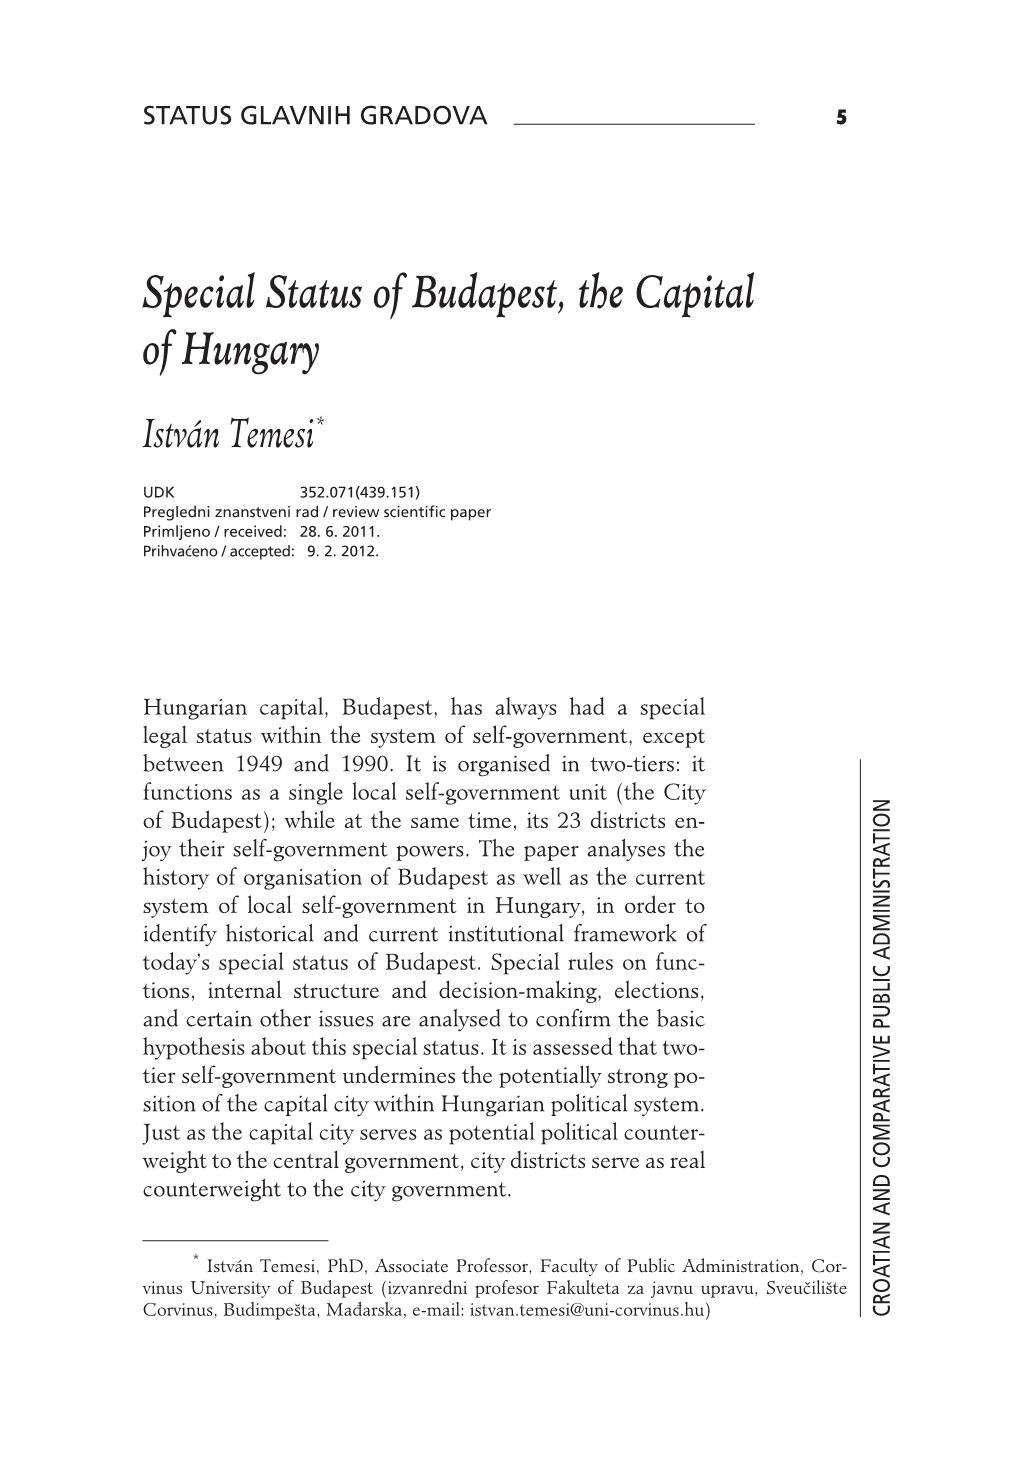 Special Status of Budapest, the Capital of Hungary